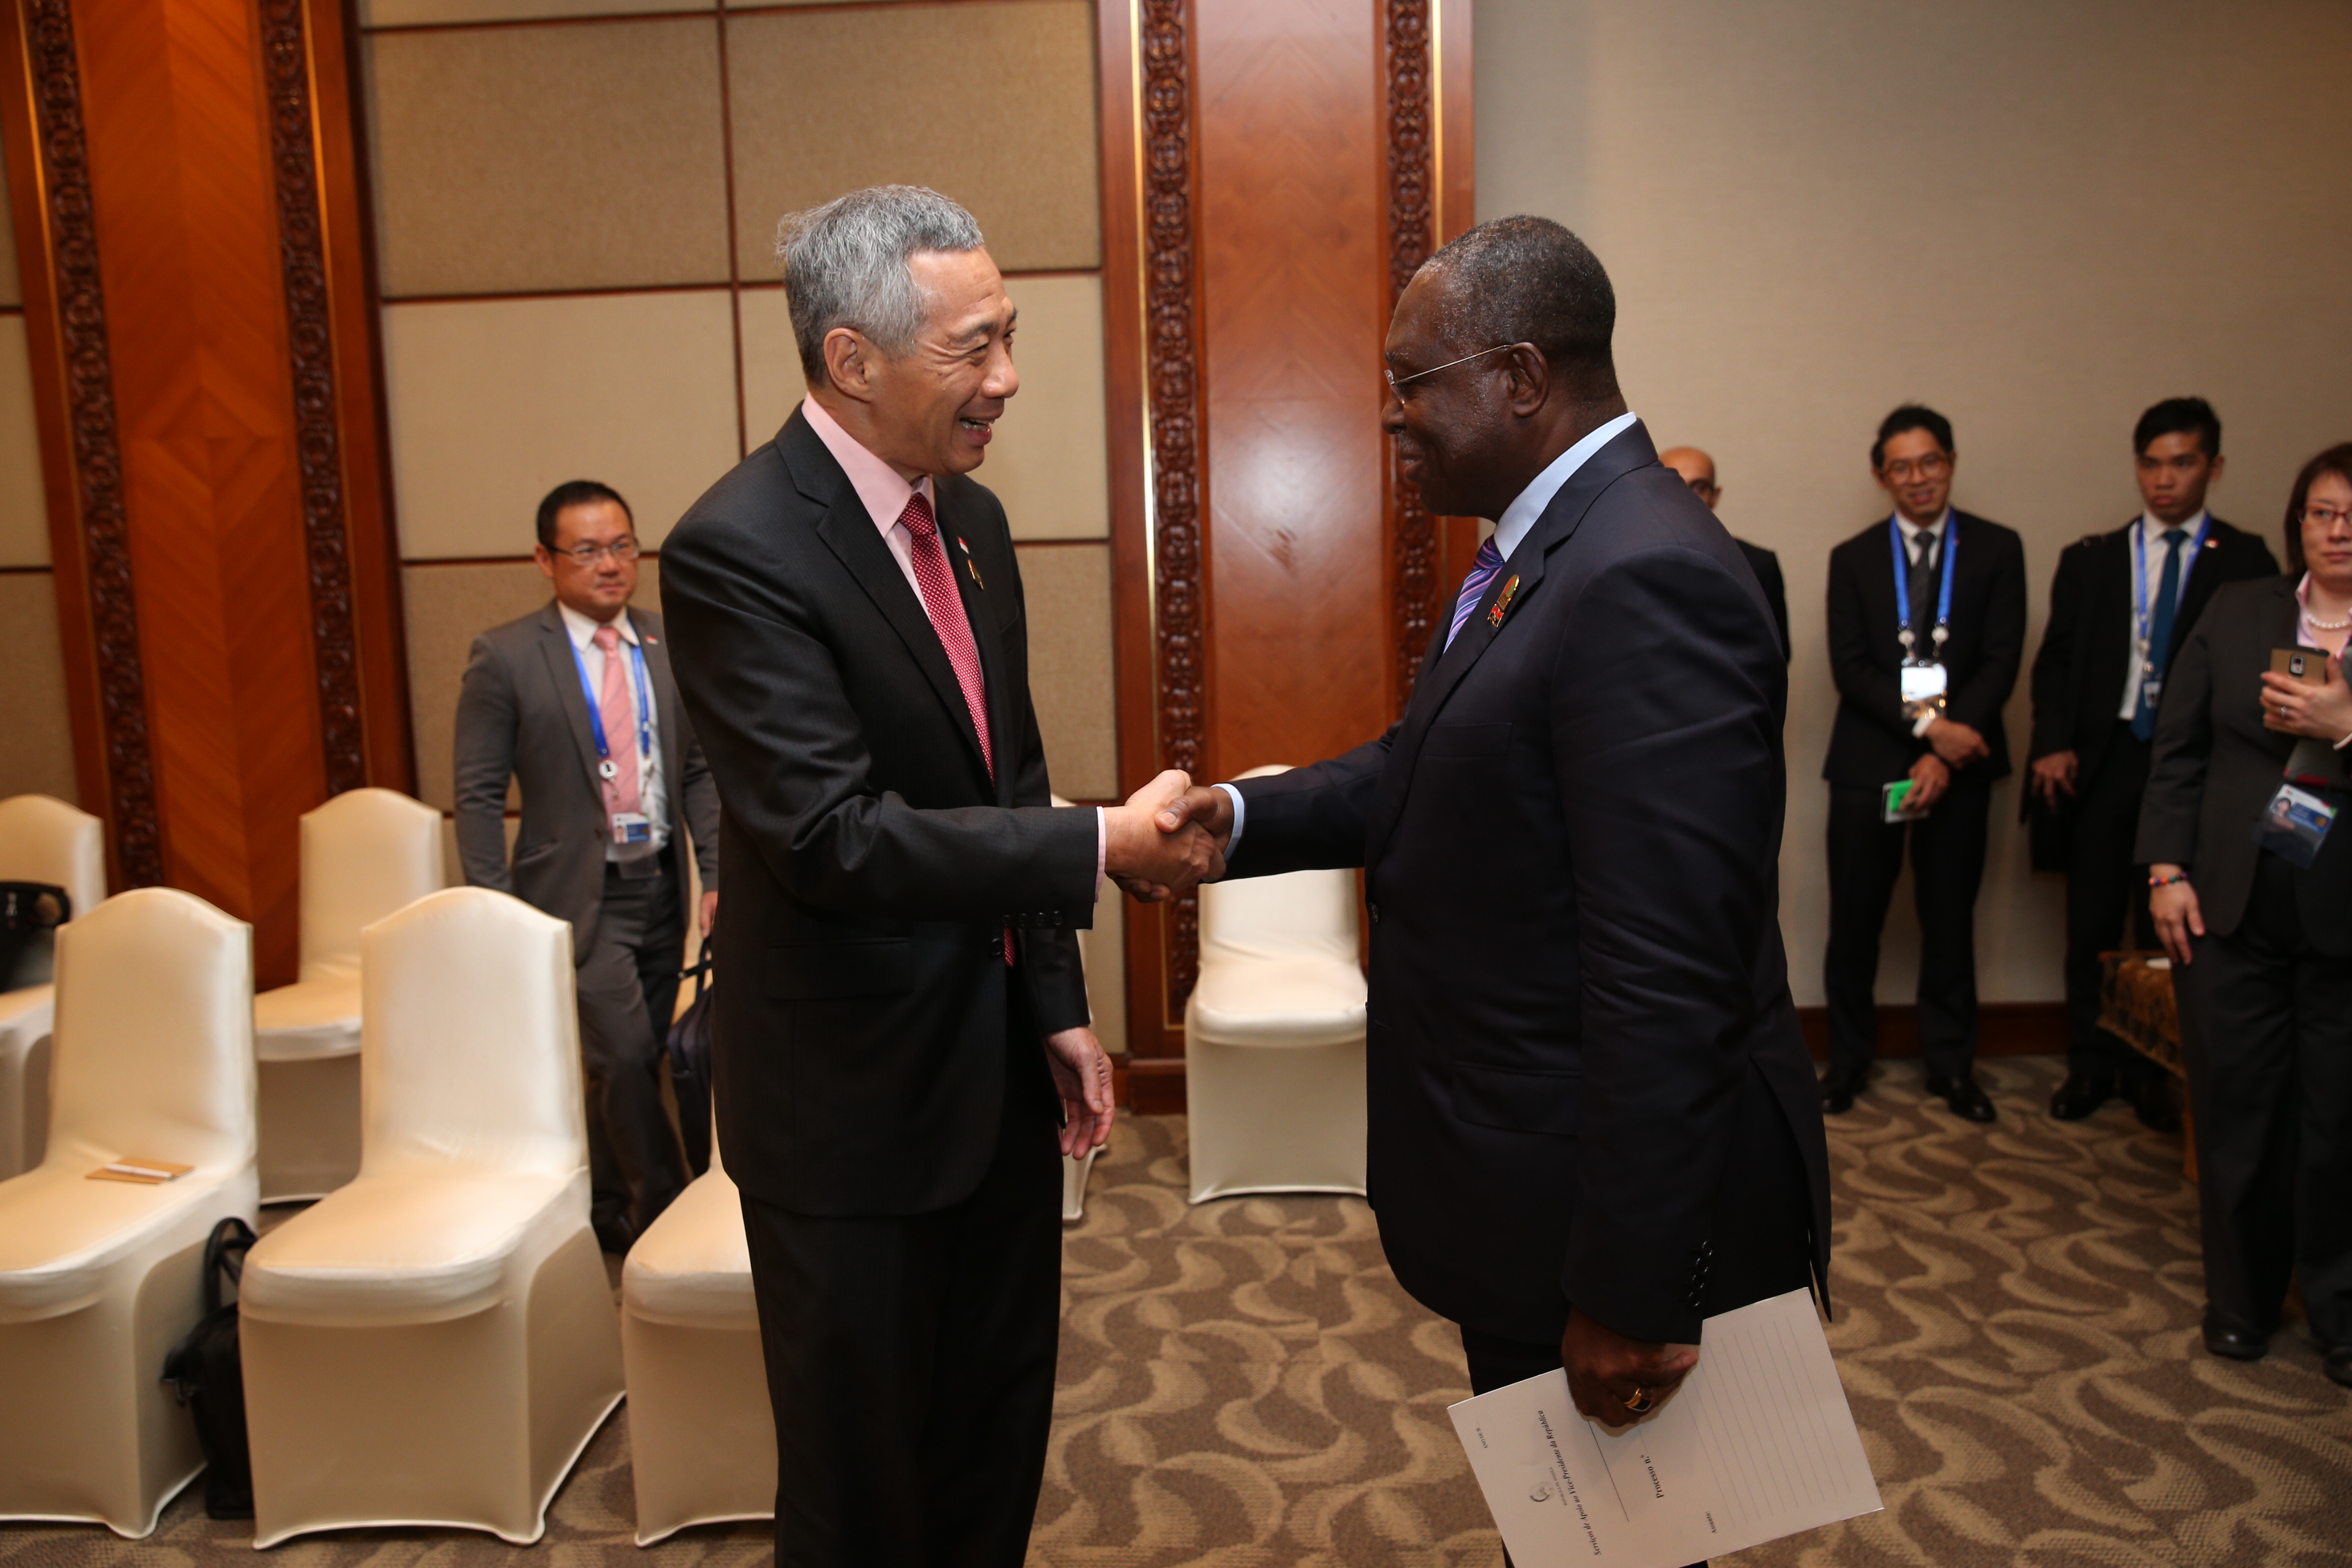 Prime Minister Lee Hsien Loong meeting Angolan Vice-President Manue Vincente at the sidelines of the 2nd Asian-African Summit - Apr 2015 (MCI Photo by Terence Tan)